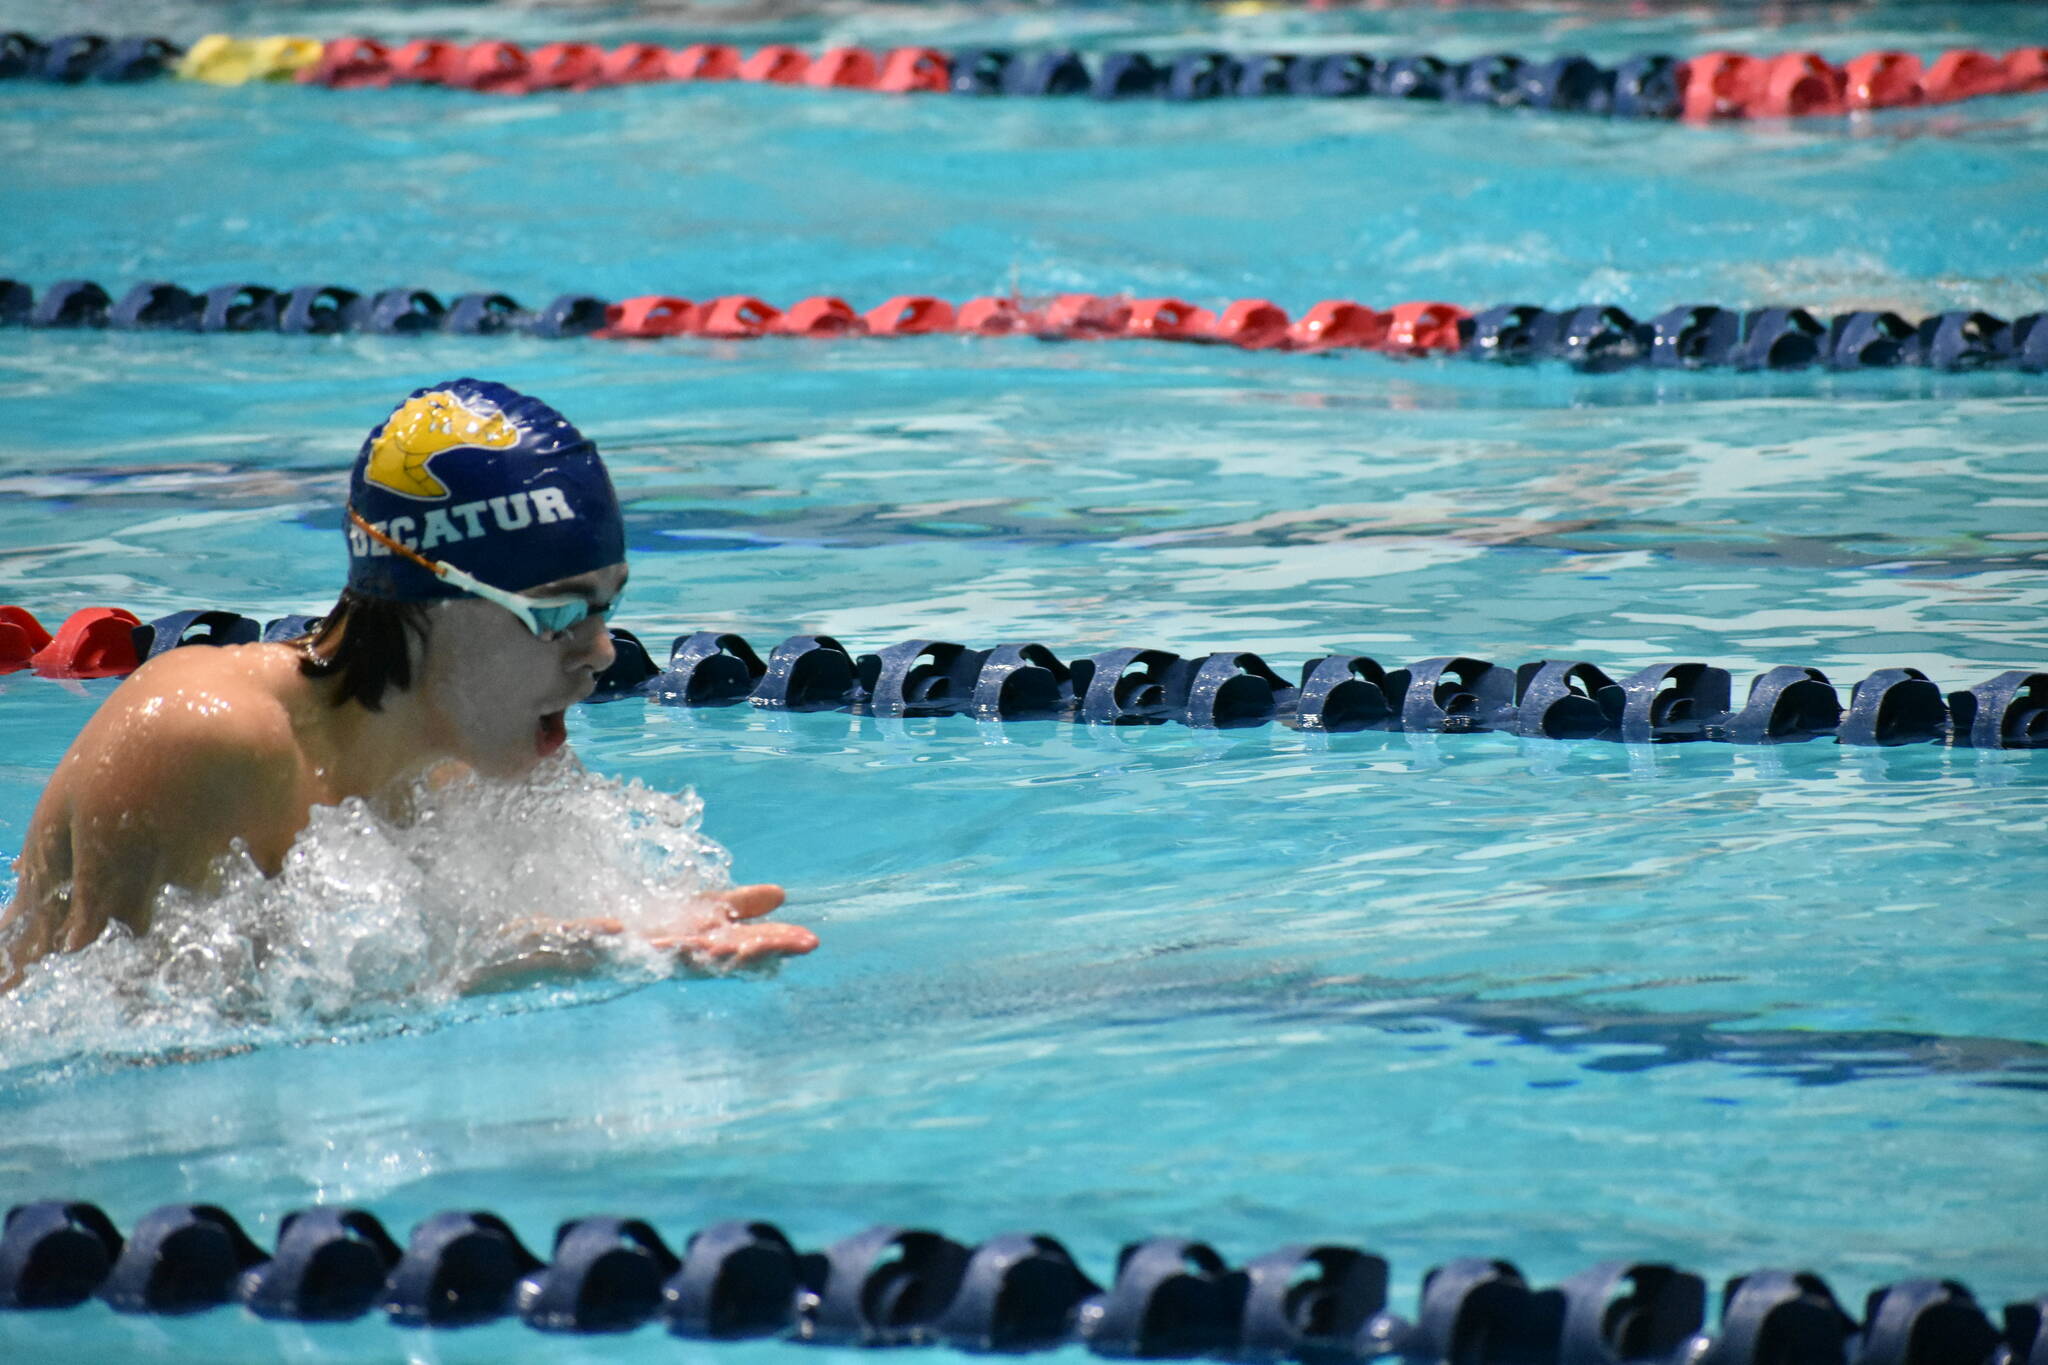 Decatur swimmer in the breaststroke event. Ben Ray / The Mirror